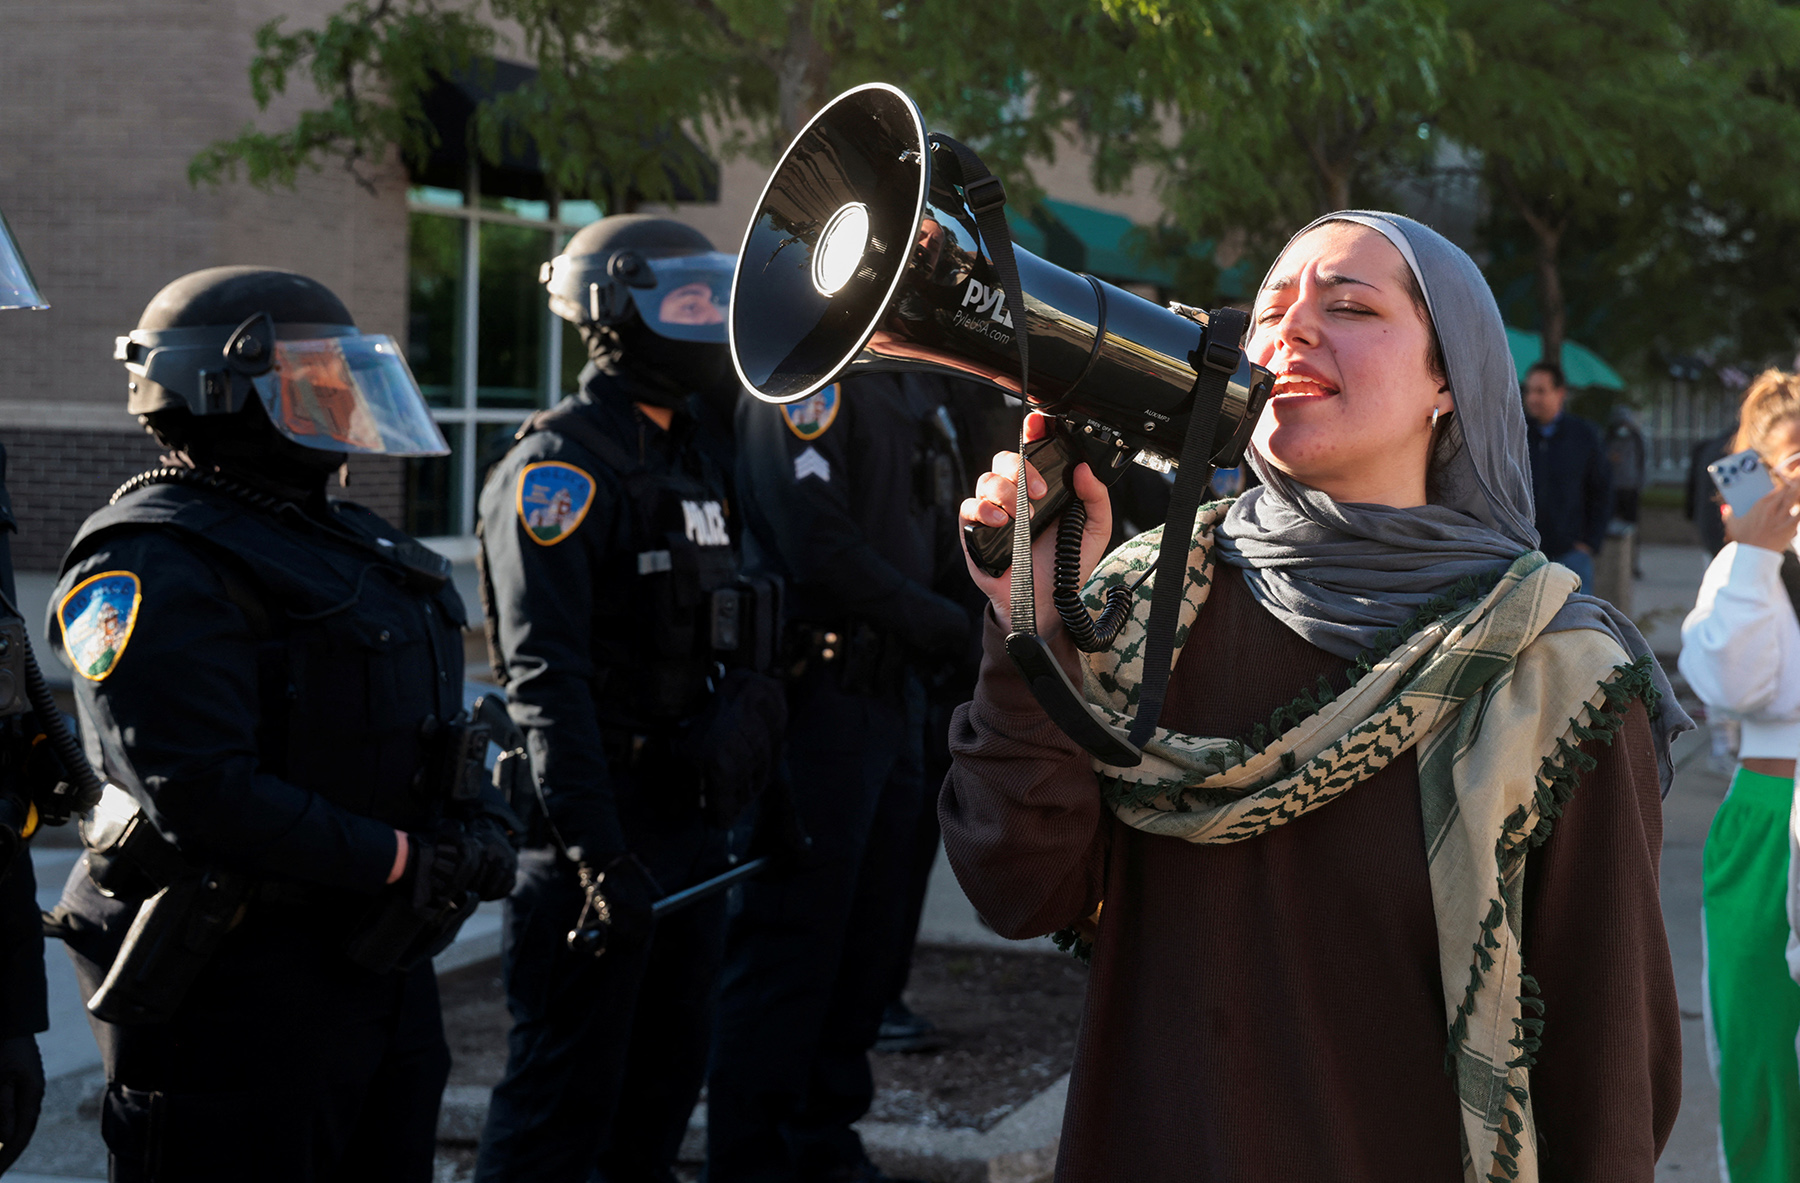 A pro-Palestinnian demonstrator protests after the Wayne State University police raided the WSU student encampment in Detroit